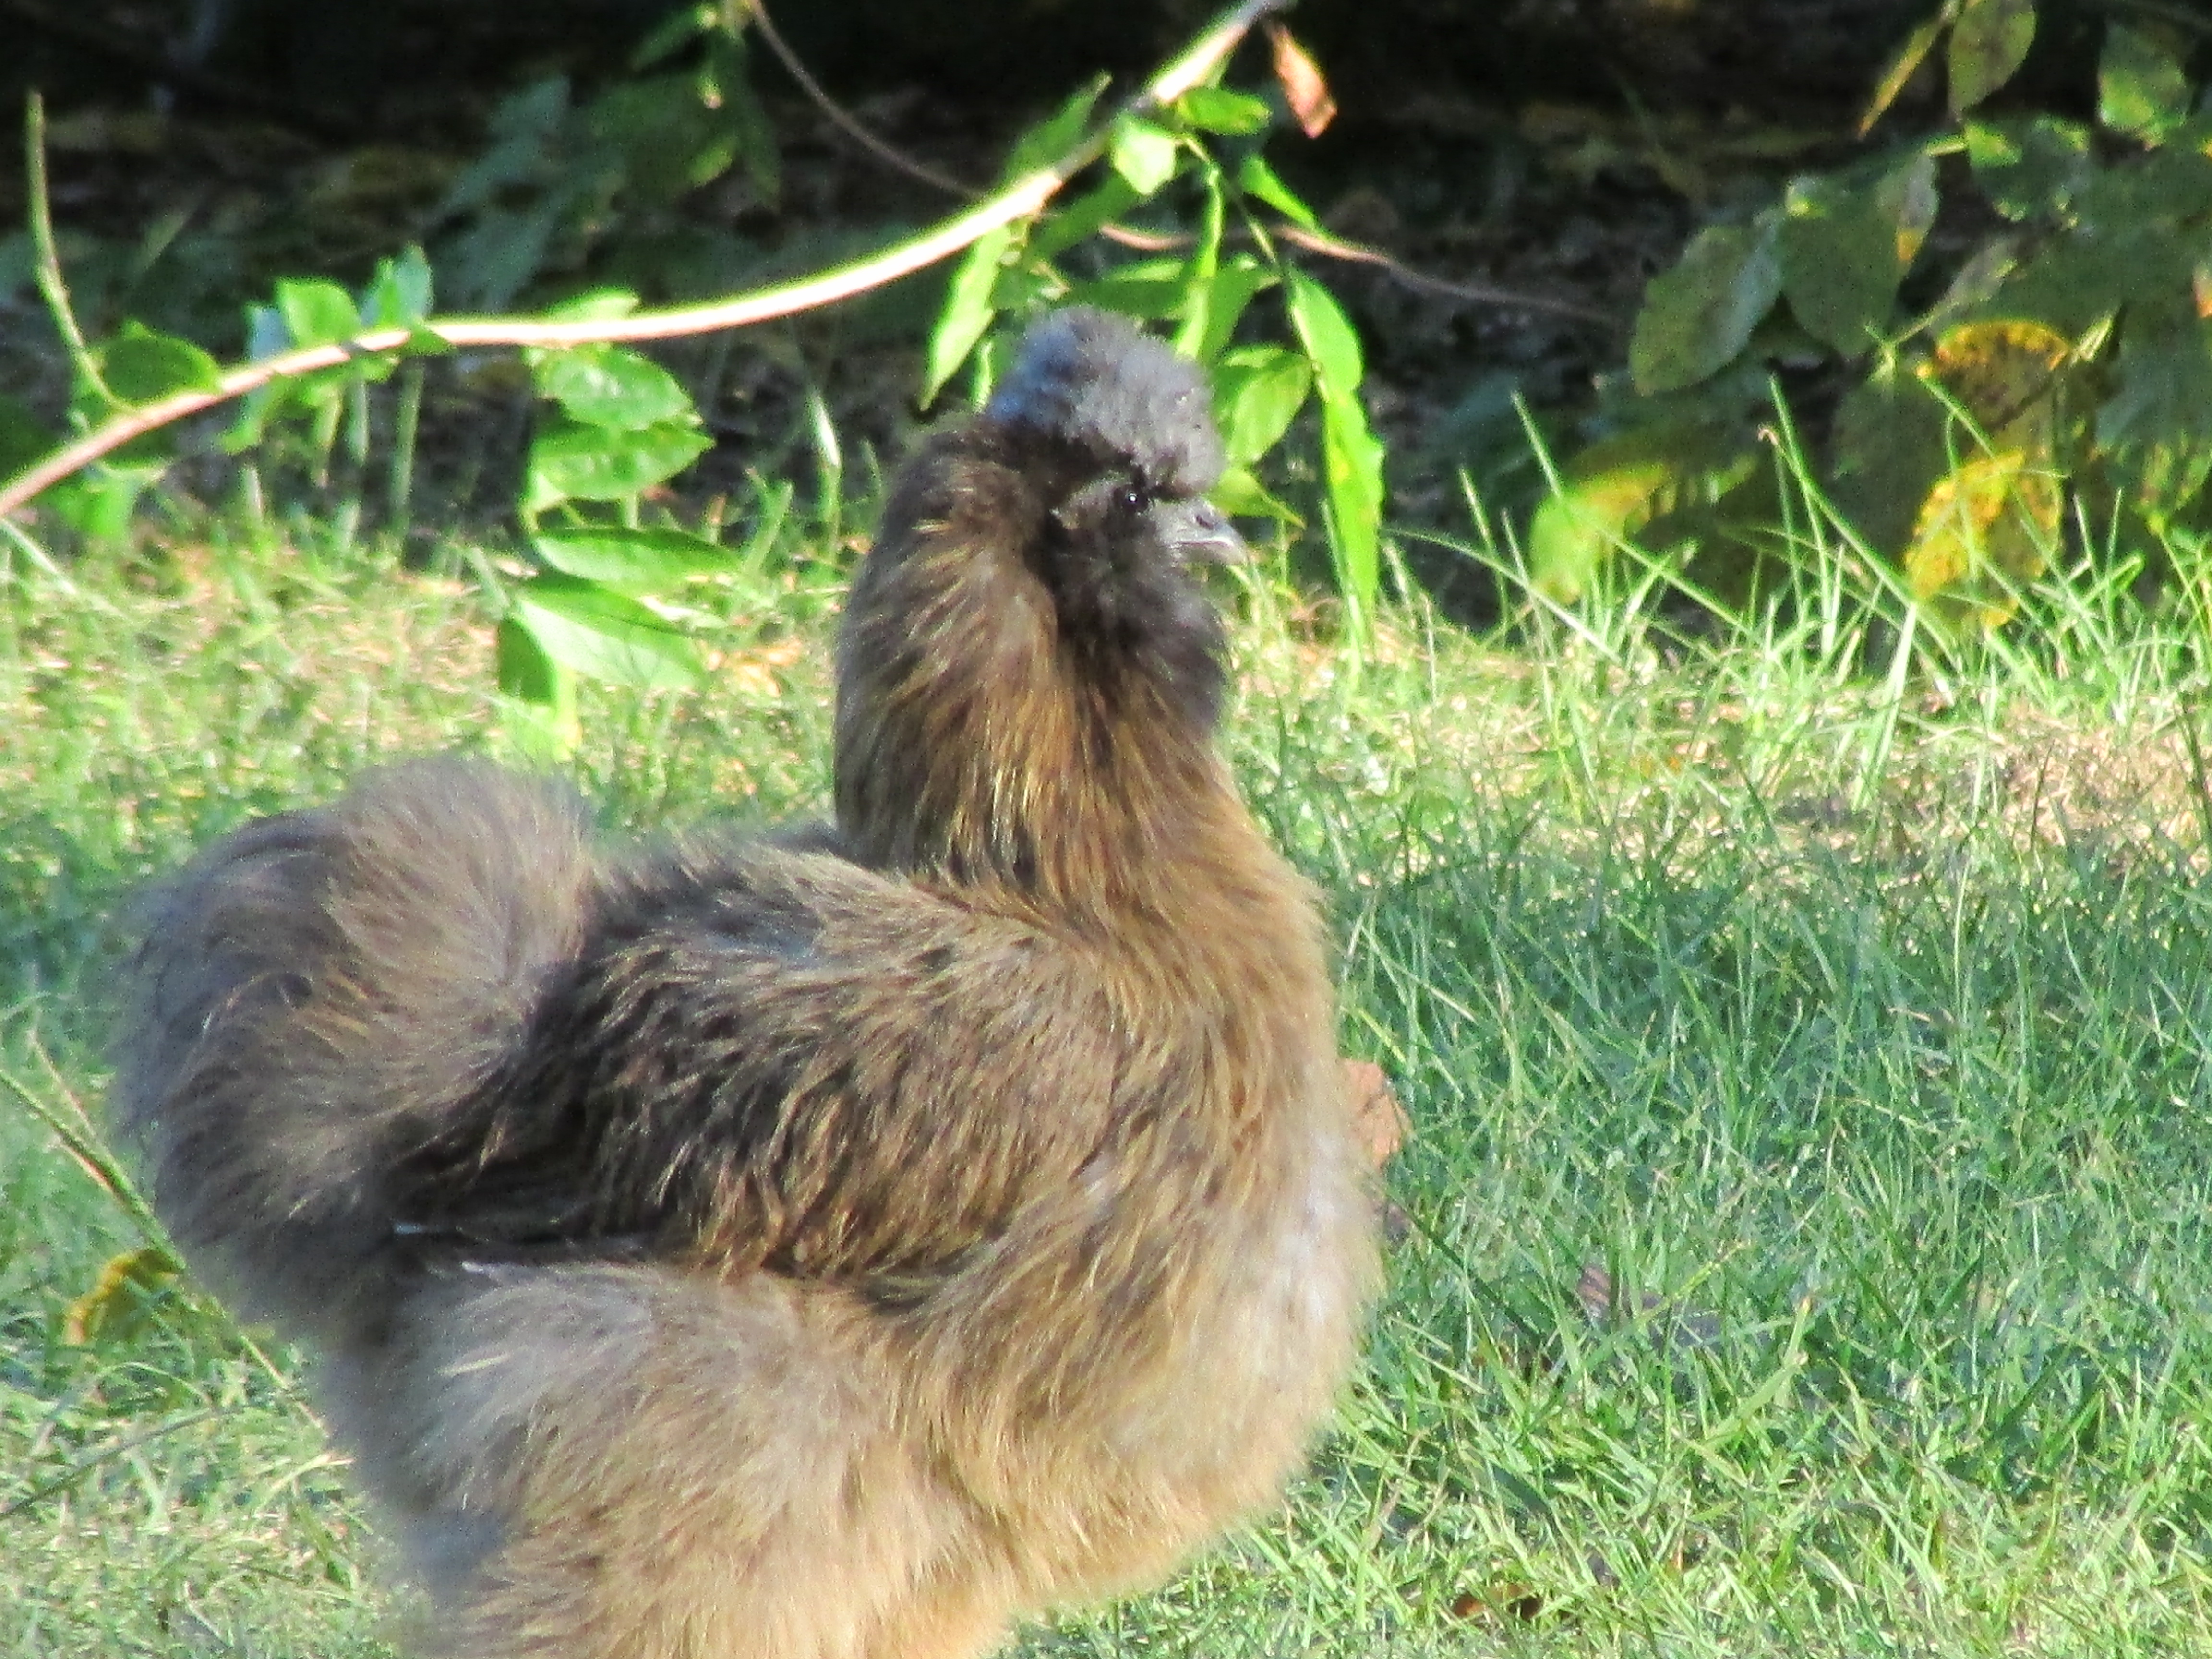 this is my silky hen mama  O.K. I did trim her wig its usually long black rounded feathers, but she really was having trouble seeing, she got so much friskier after I cut it ,but it does look funny and I love her any ways , she's a sweet heart